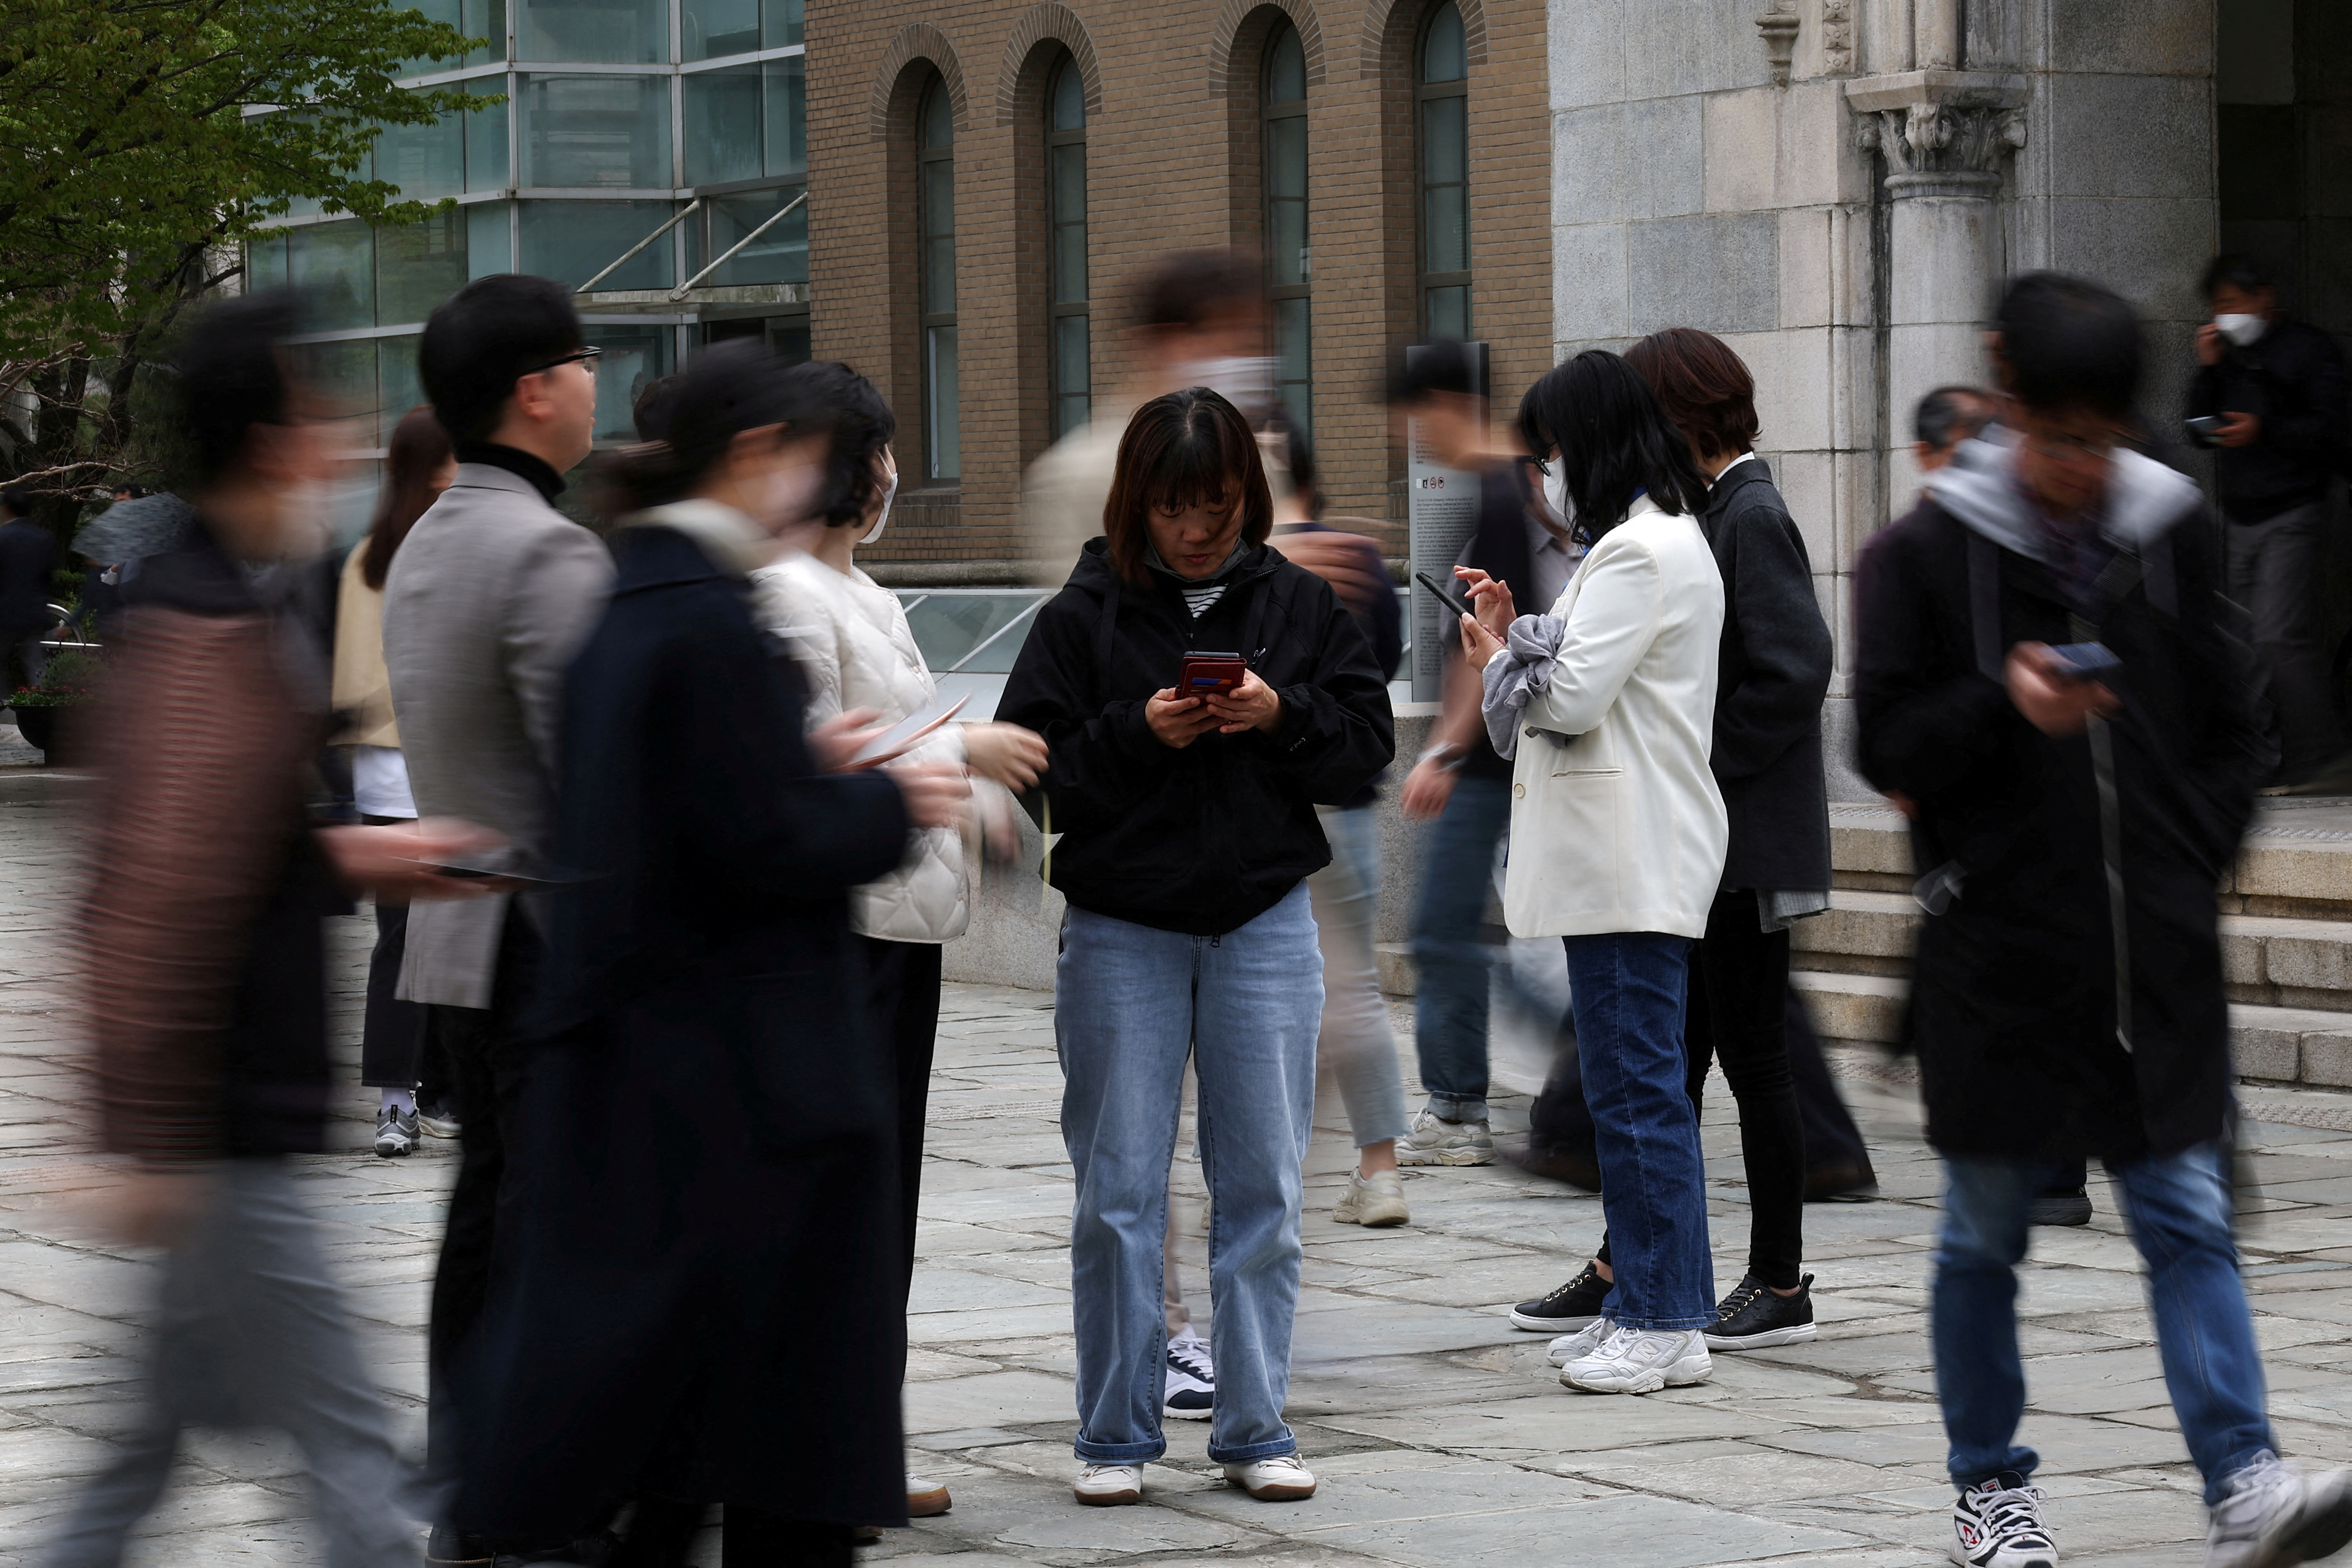 South Koreans flock to cash collection apps as living costs rise